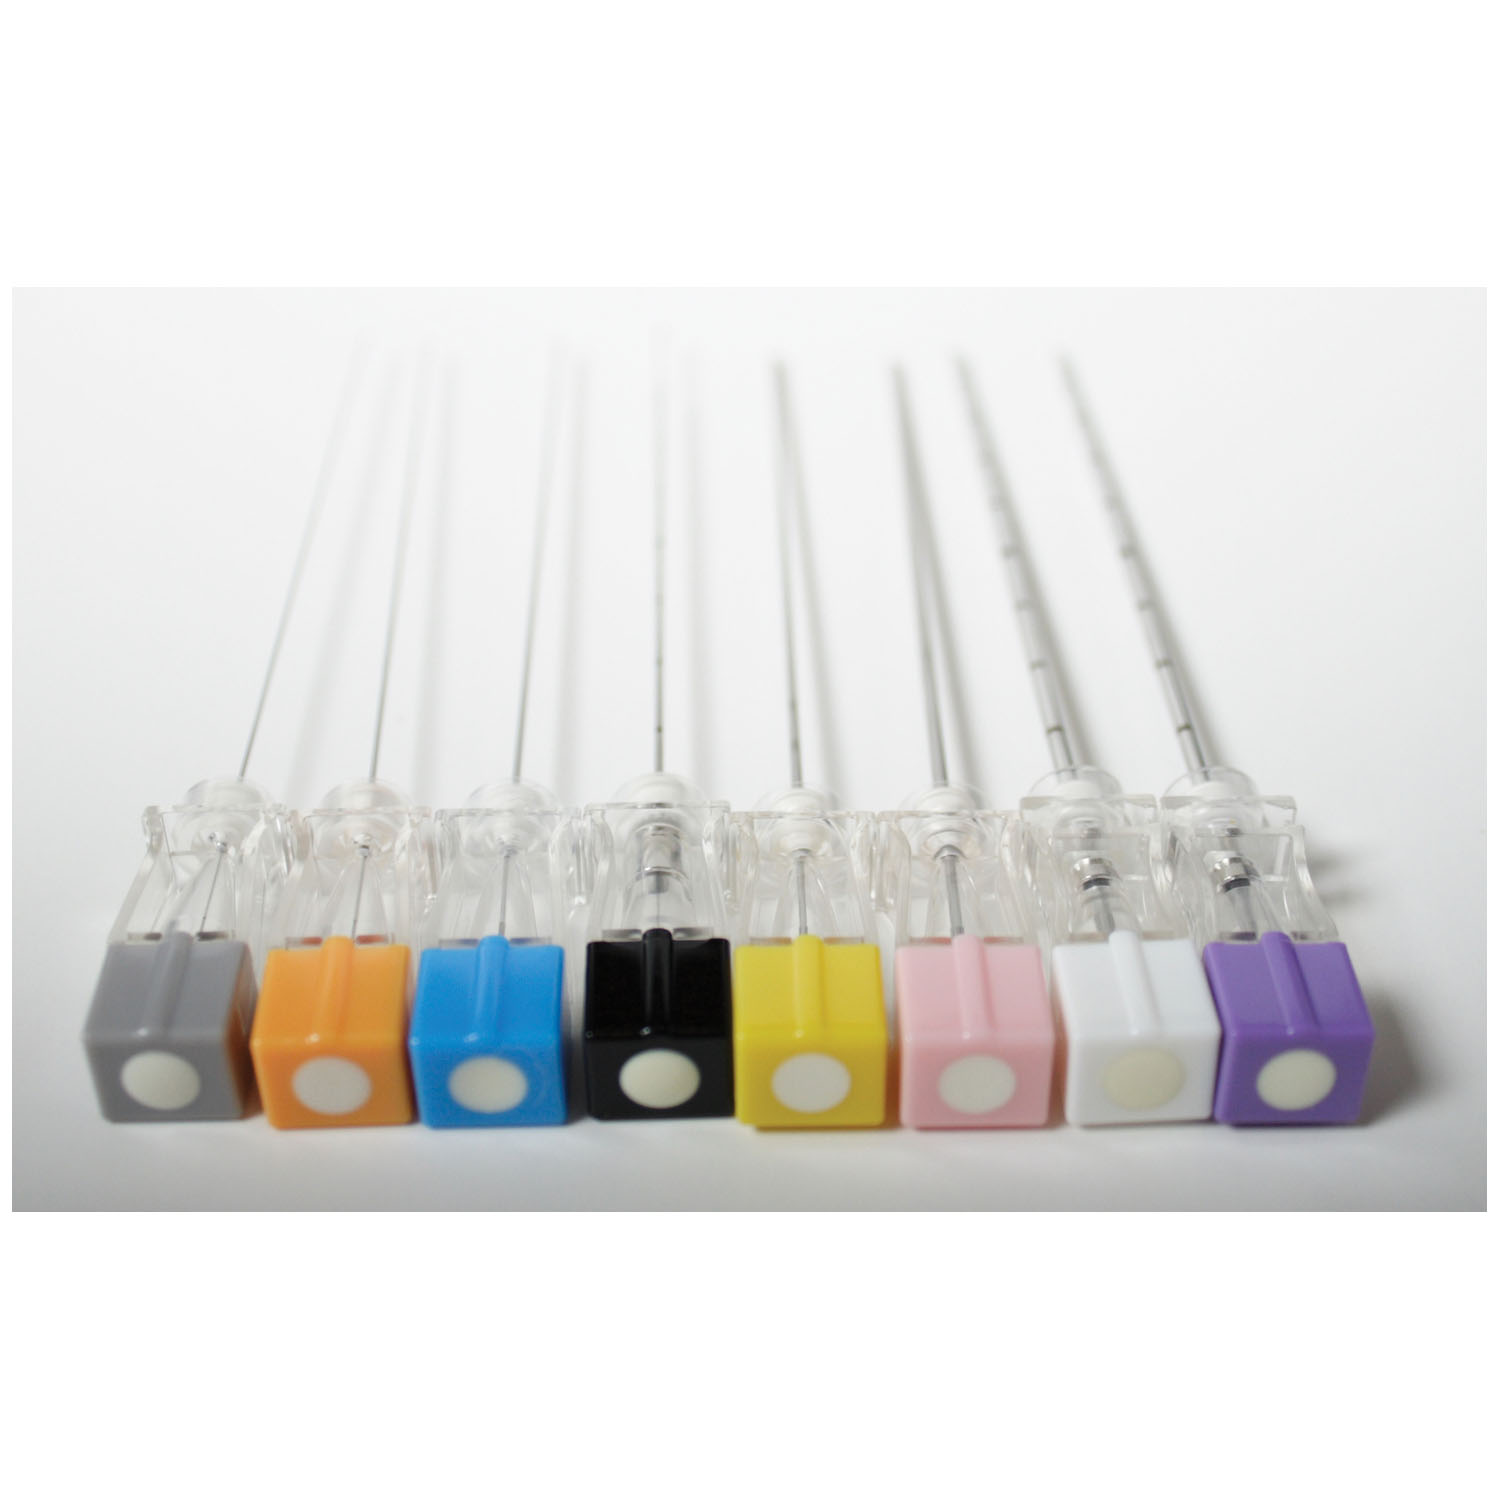 MYCO RELI QUINCKE POINT SPINAL NEEDLES : SN20G601 BX           $112.45 Stocked